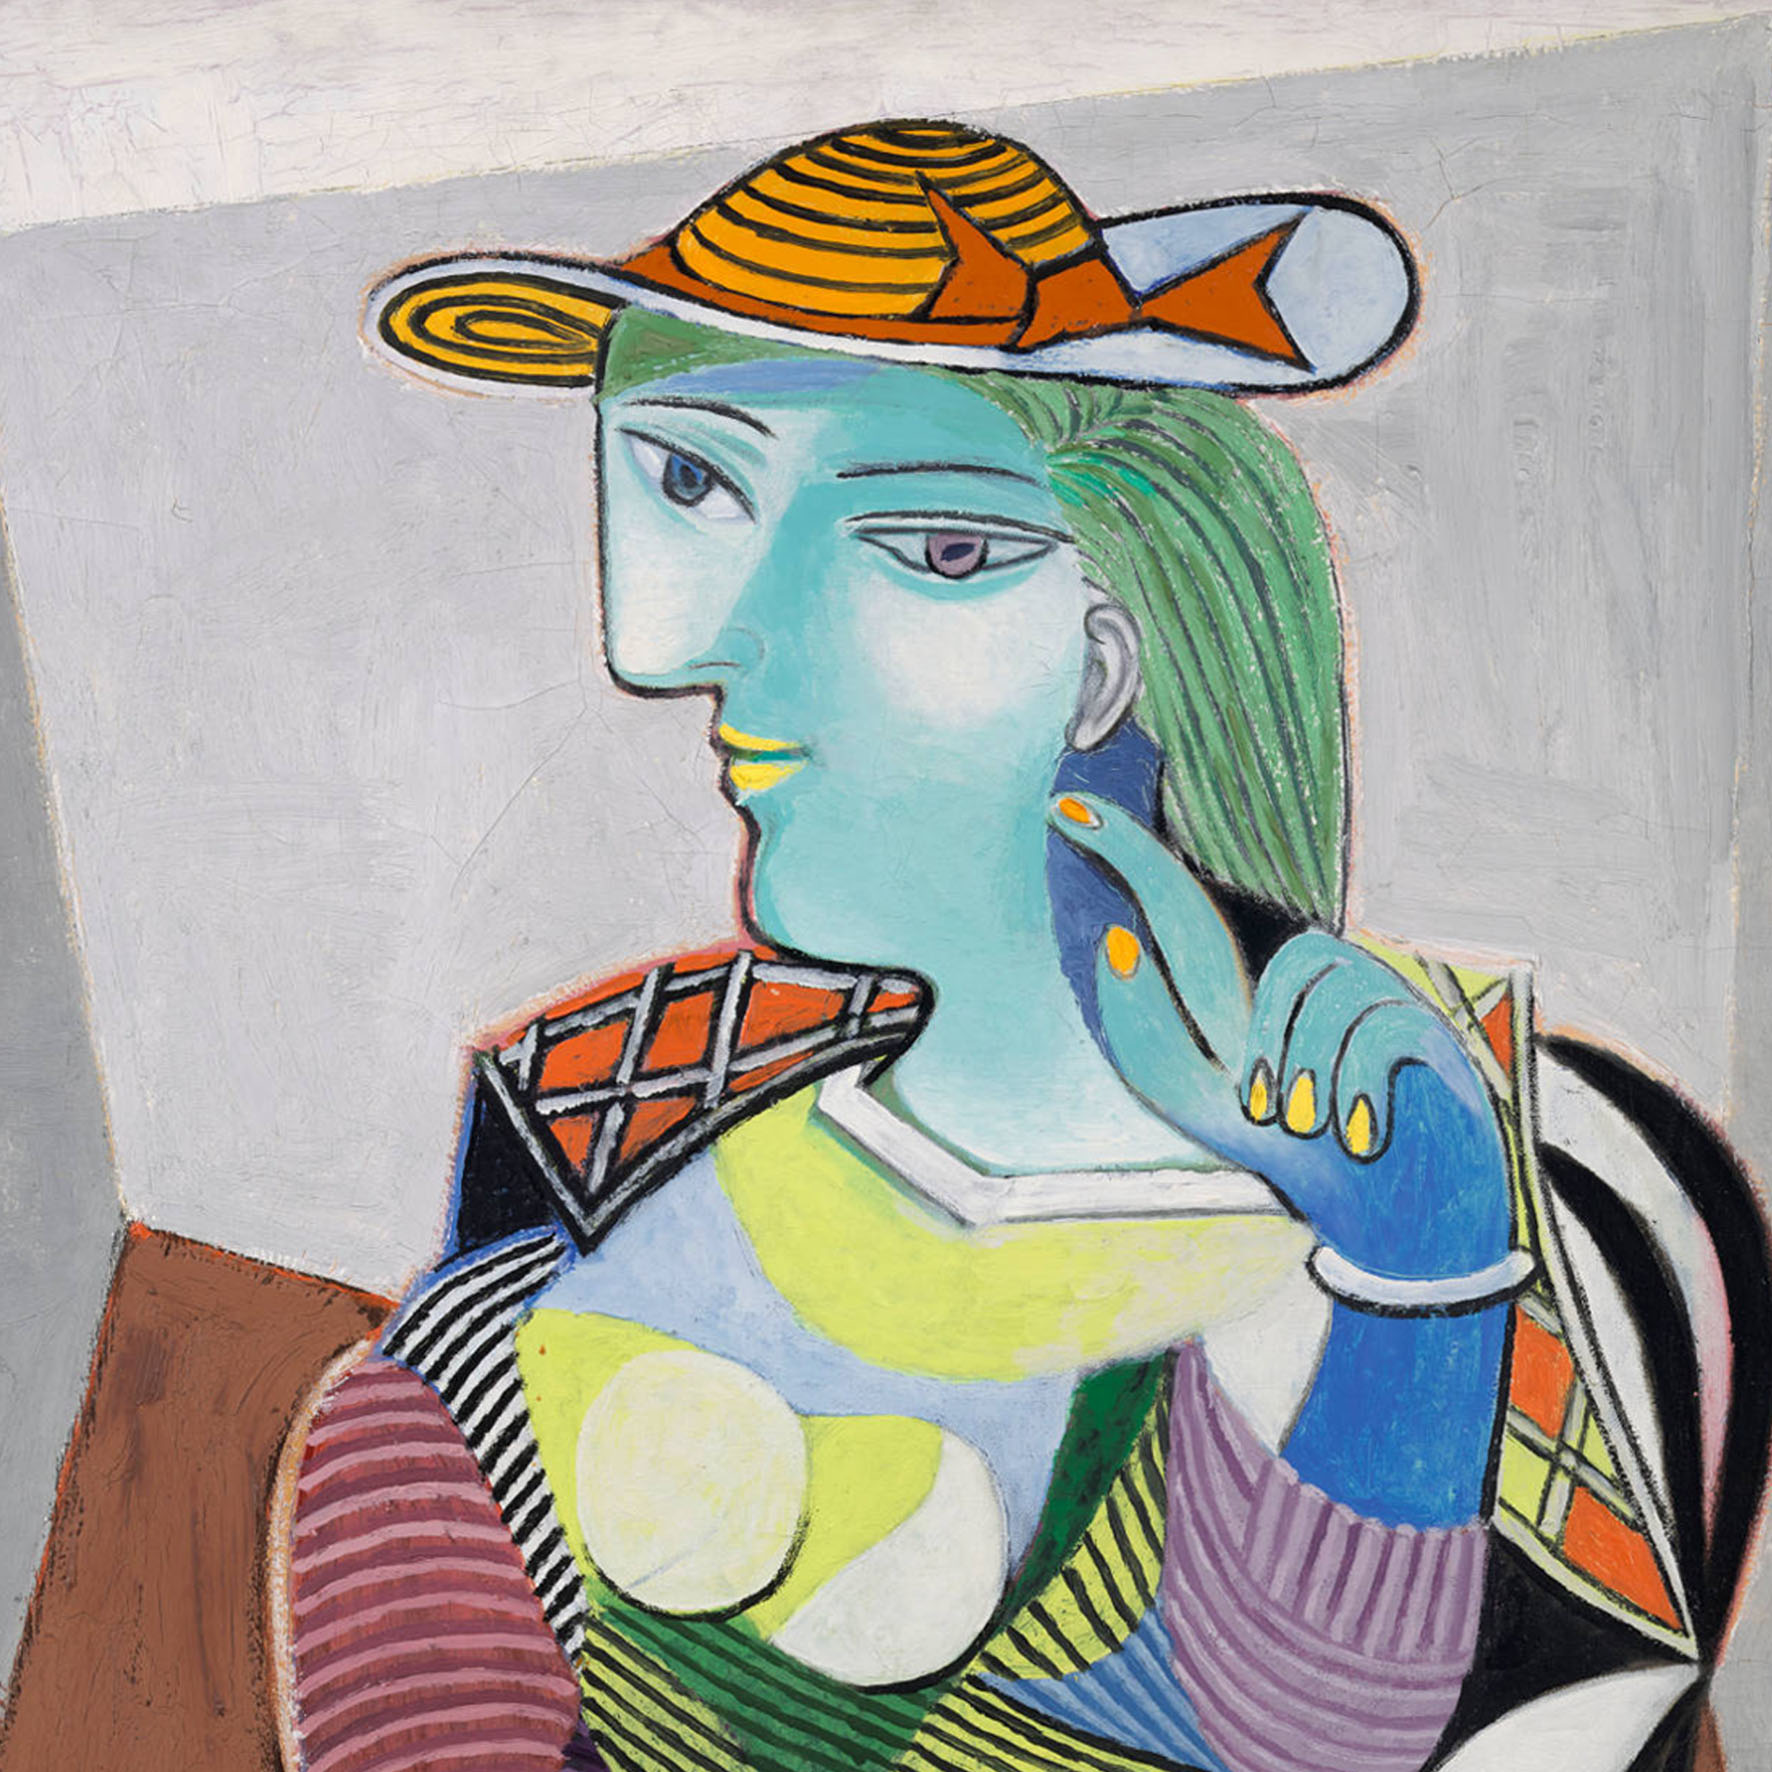 PICASSO. MASTERPIECES FROM THE MUSEE NATIONAL PICASSO-PARIS